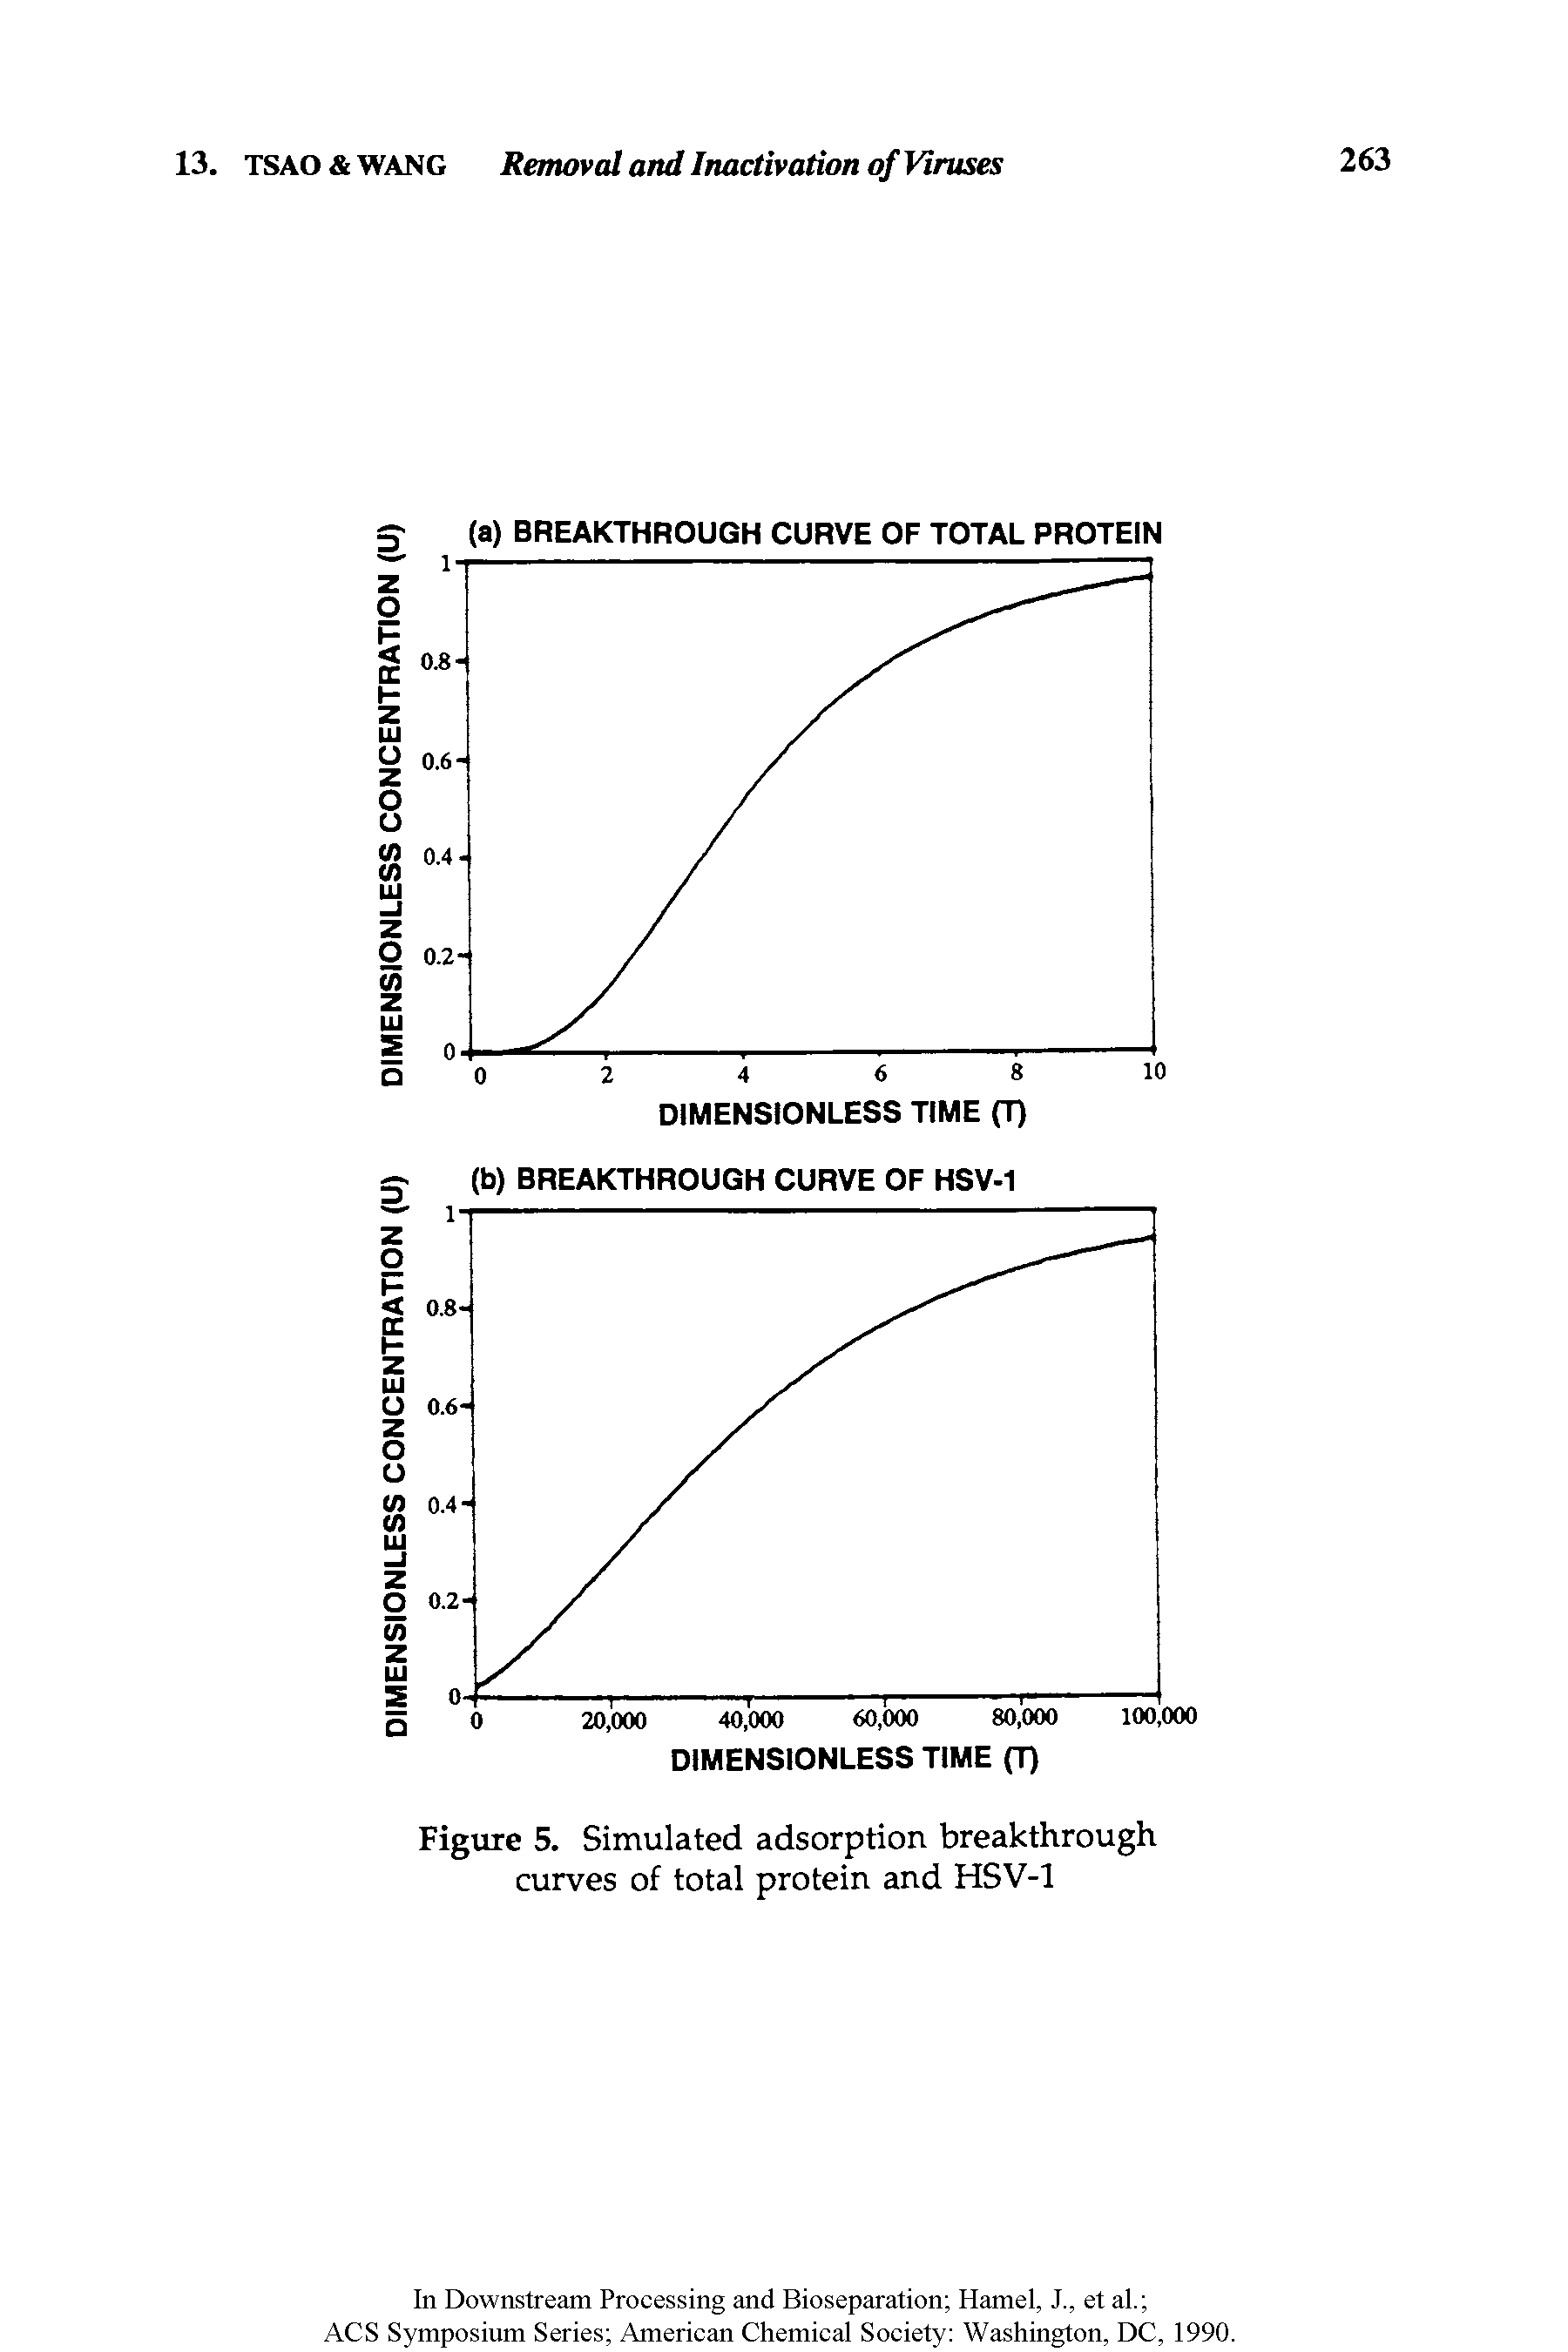 Figure 5. Simulated adsorption breakthrough curves of total protein and HSV-1...